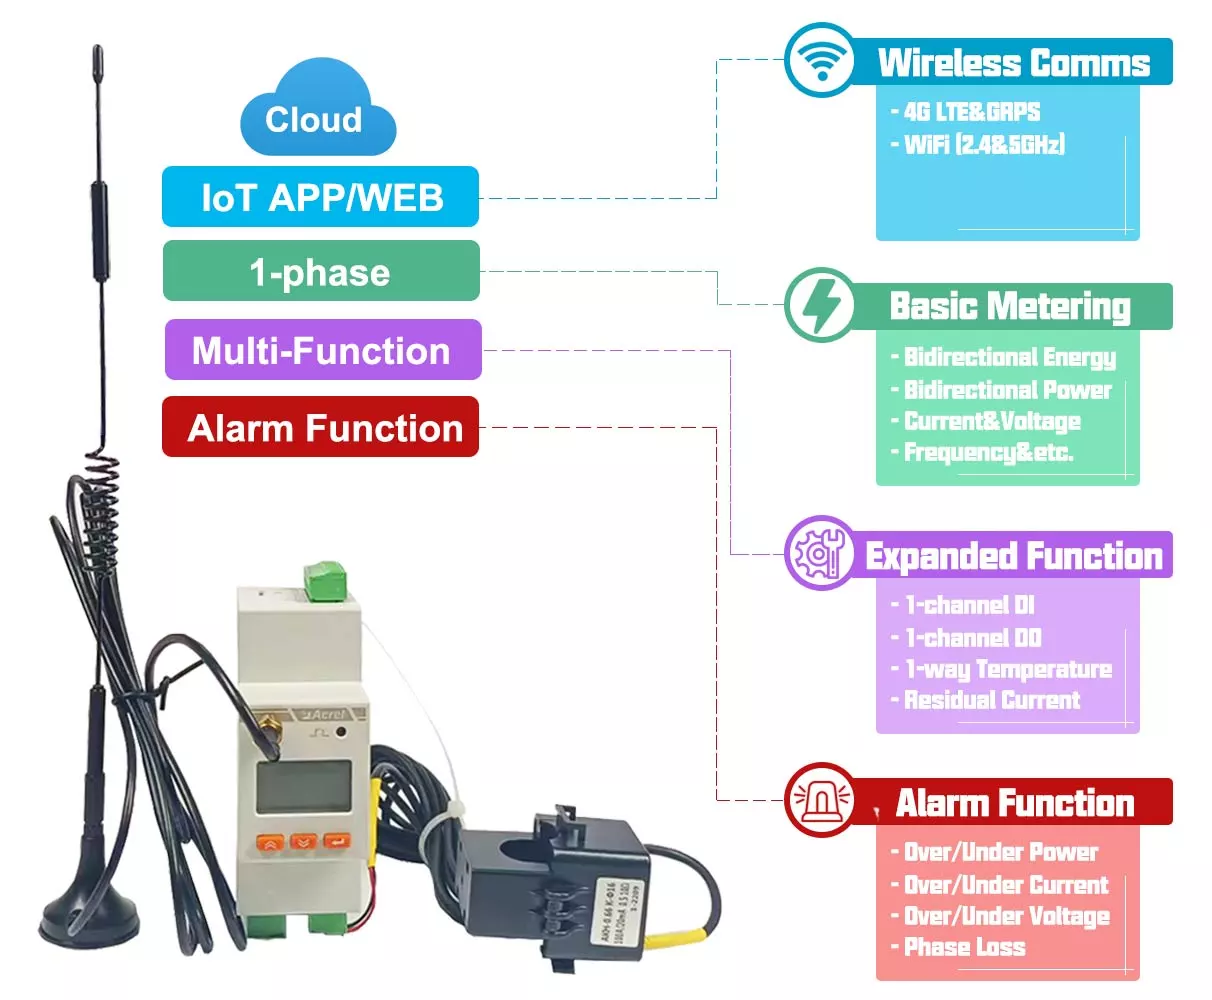 Features of ADW310 IoT 1-phase Wireless Smart Energy Meter